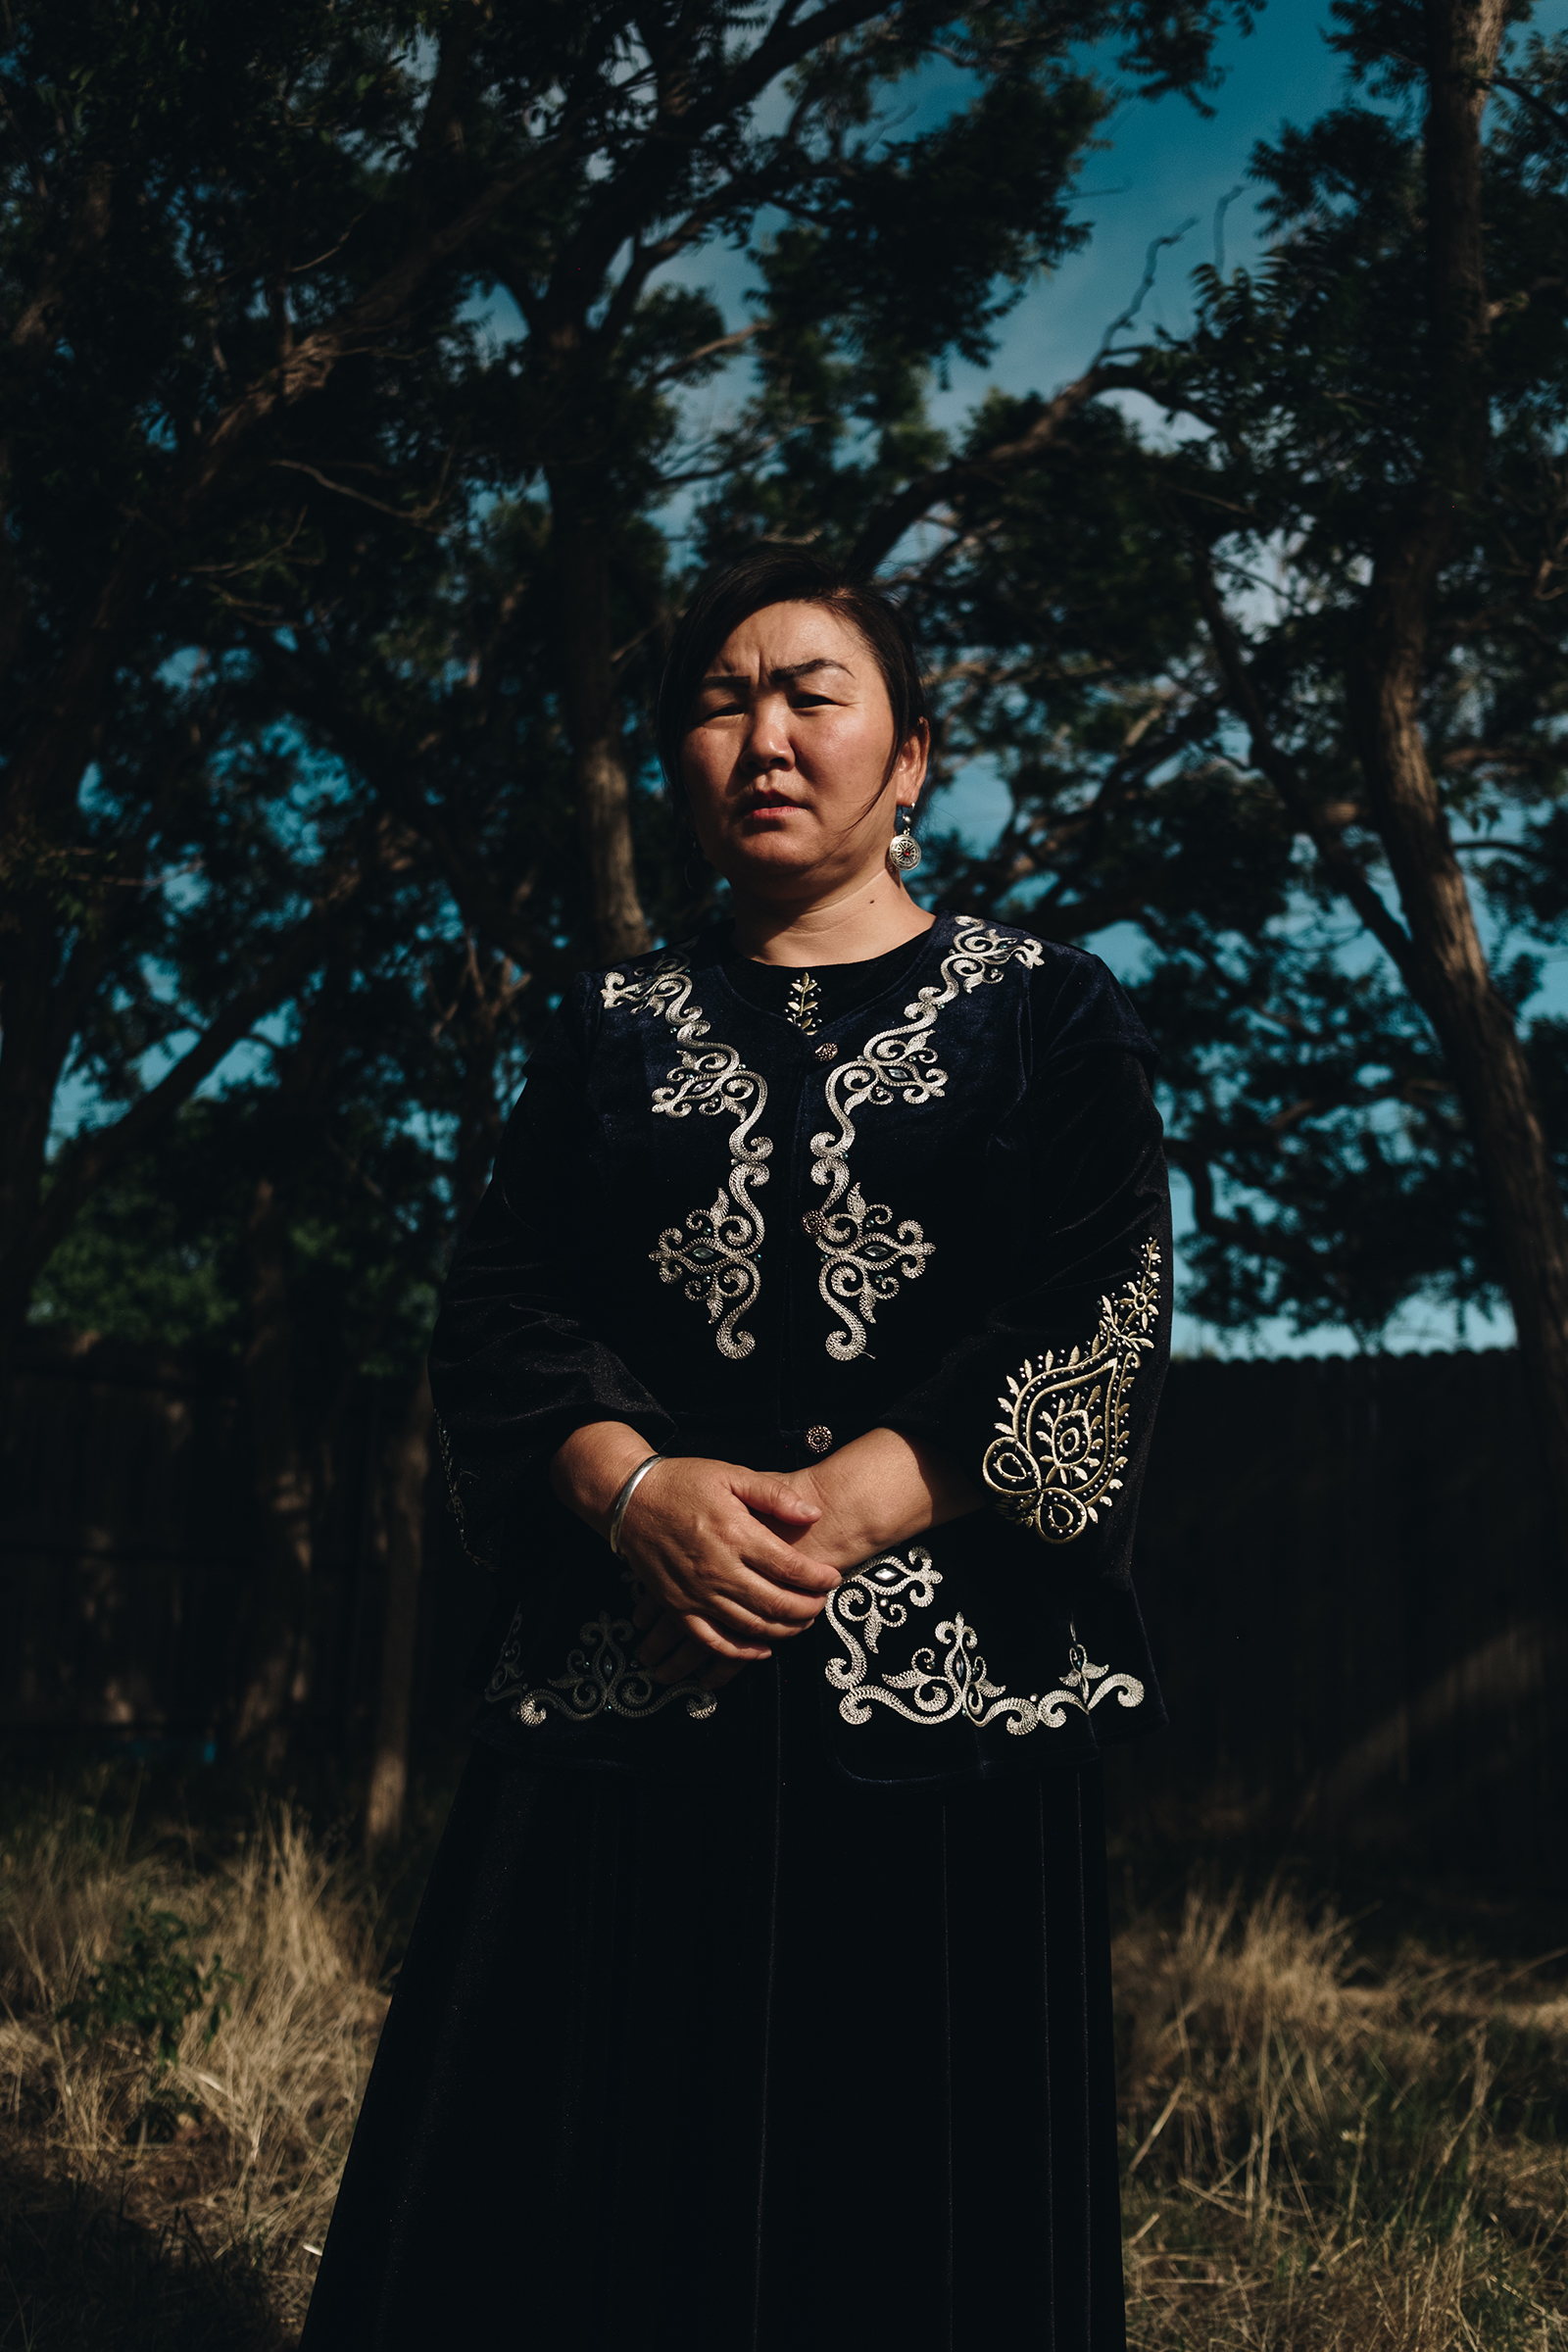 Gulzira Auelkhan, a survivor of the notorious “re-education centers” in Xinjiang, China